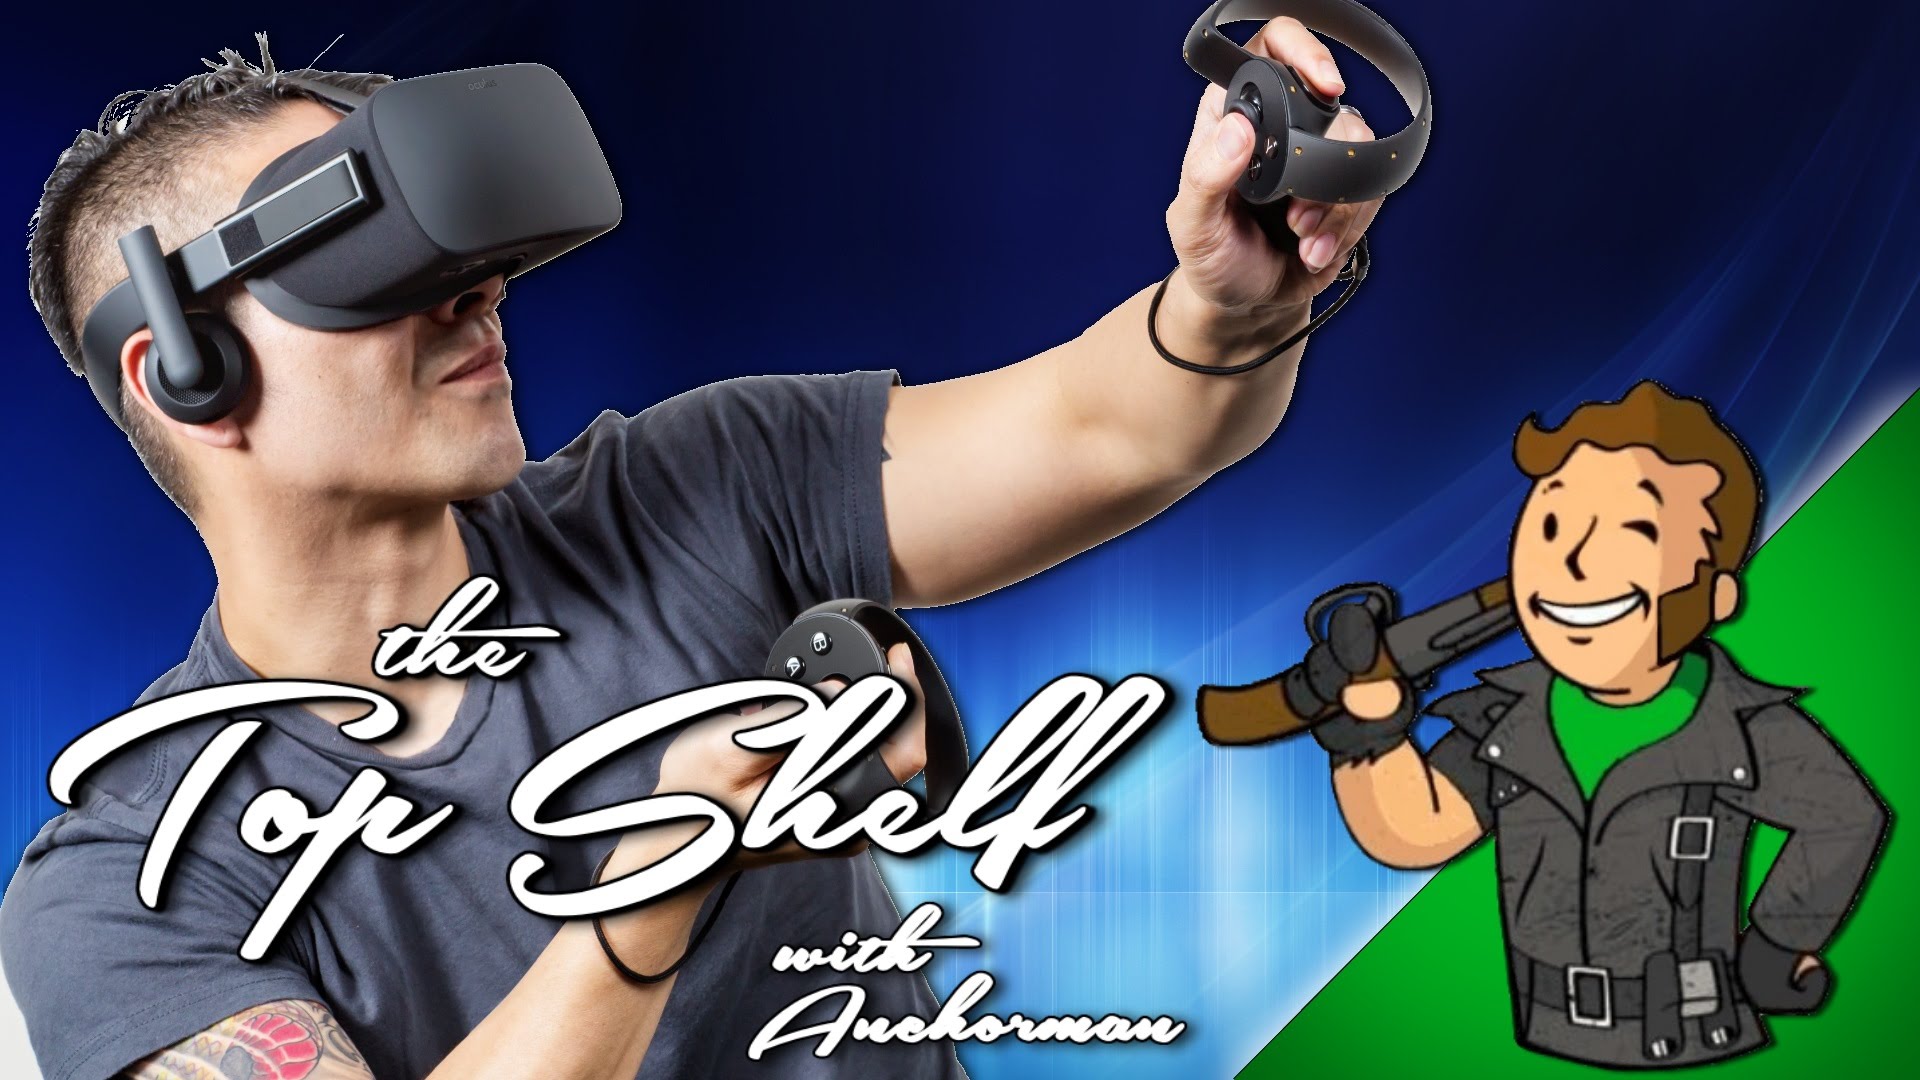 The Top Shelf with Anchorman V - The Issue With Virtual Reality Ep. 5